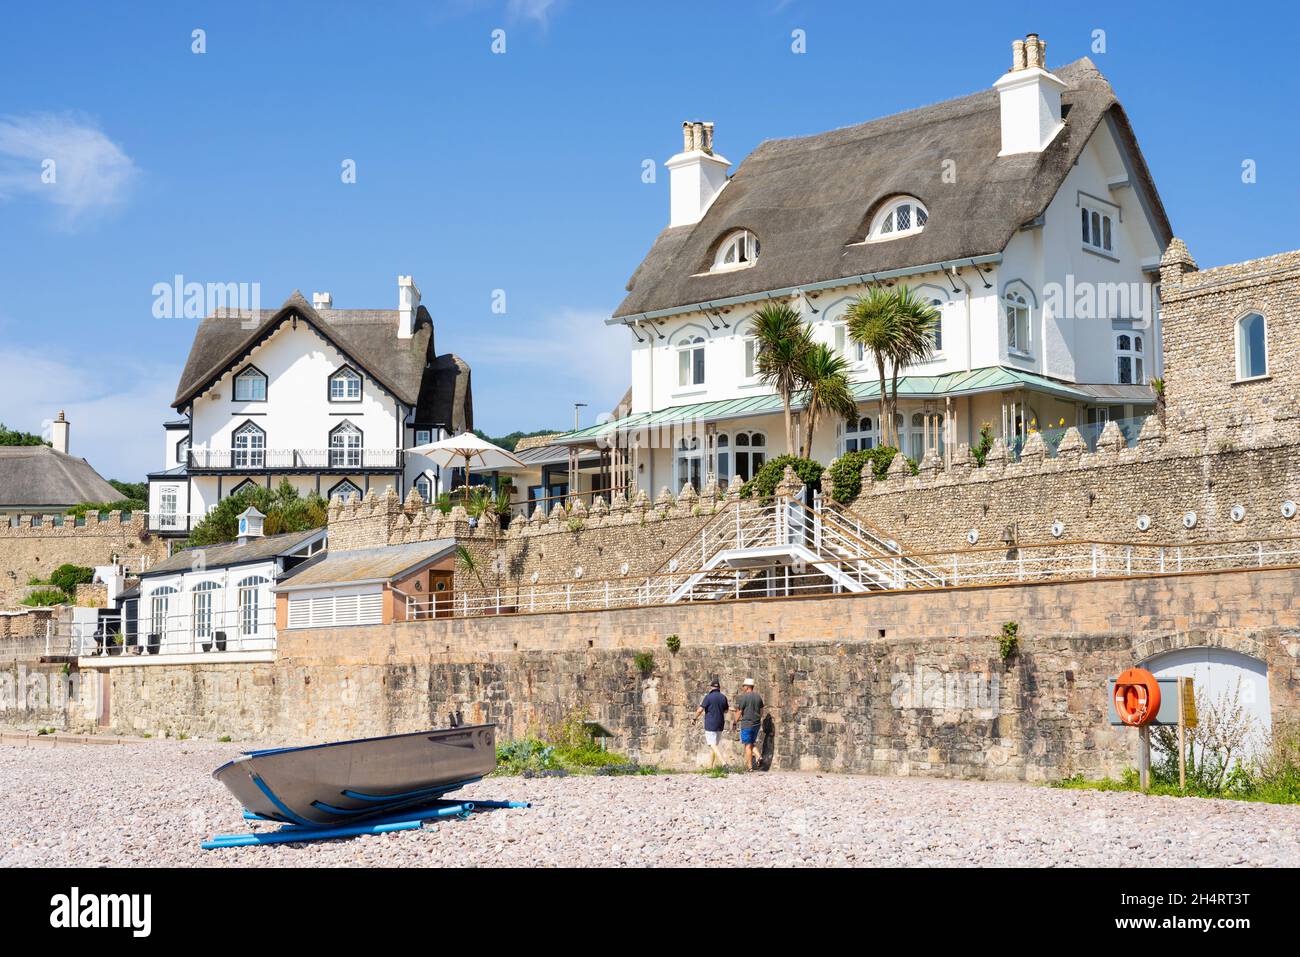 Small boat on the pebble beach under Rock Cottage Hotel and the Beacon Sidmouth Town Sidmouth Devon England UK GB Europe Stock Photo